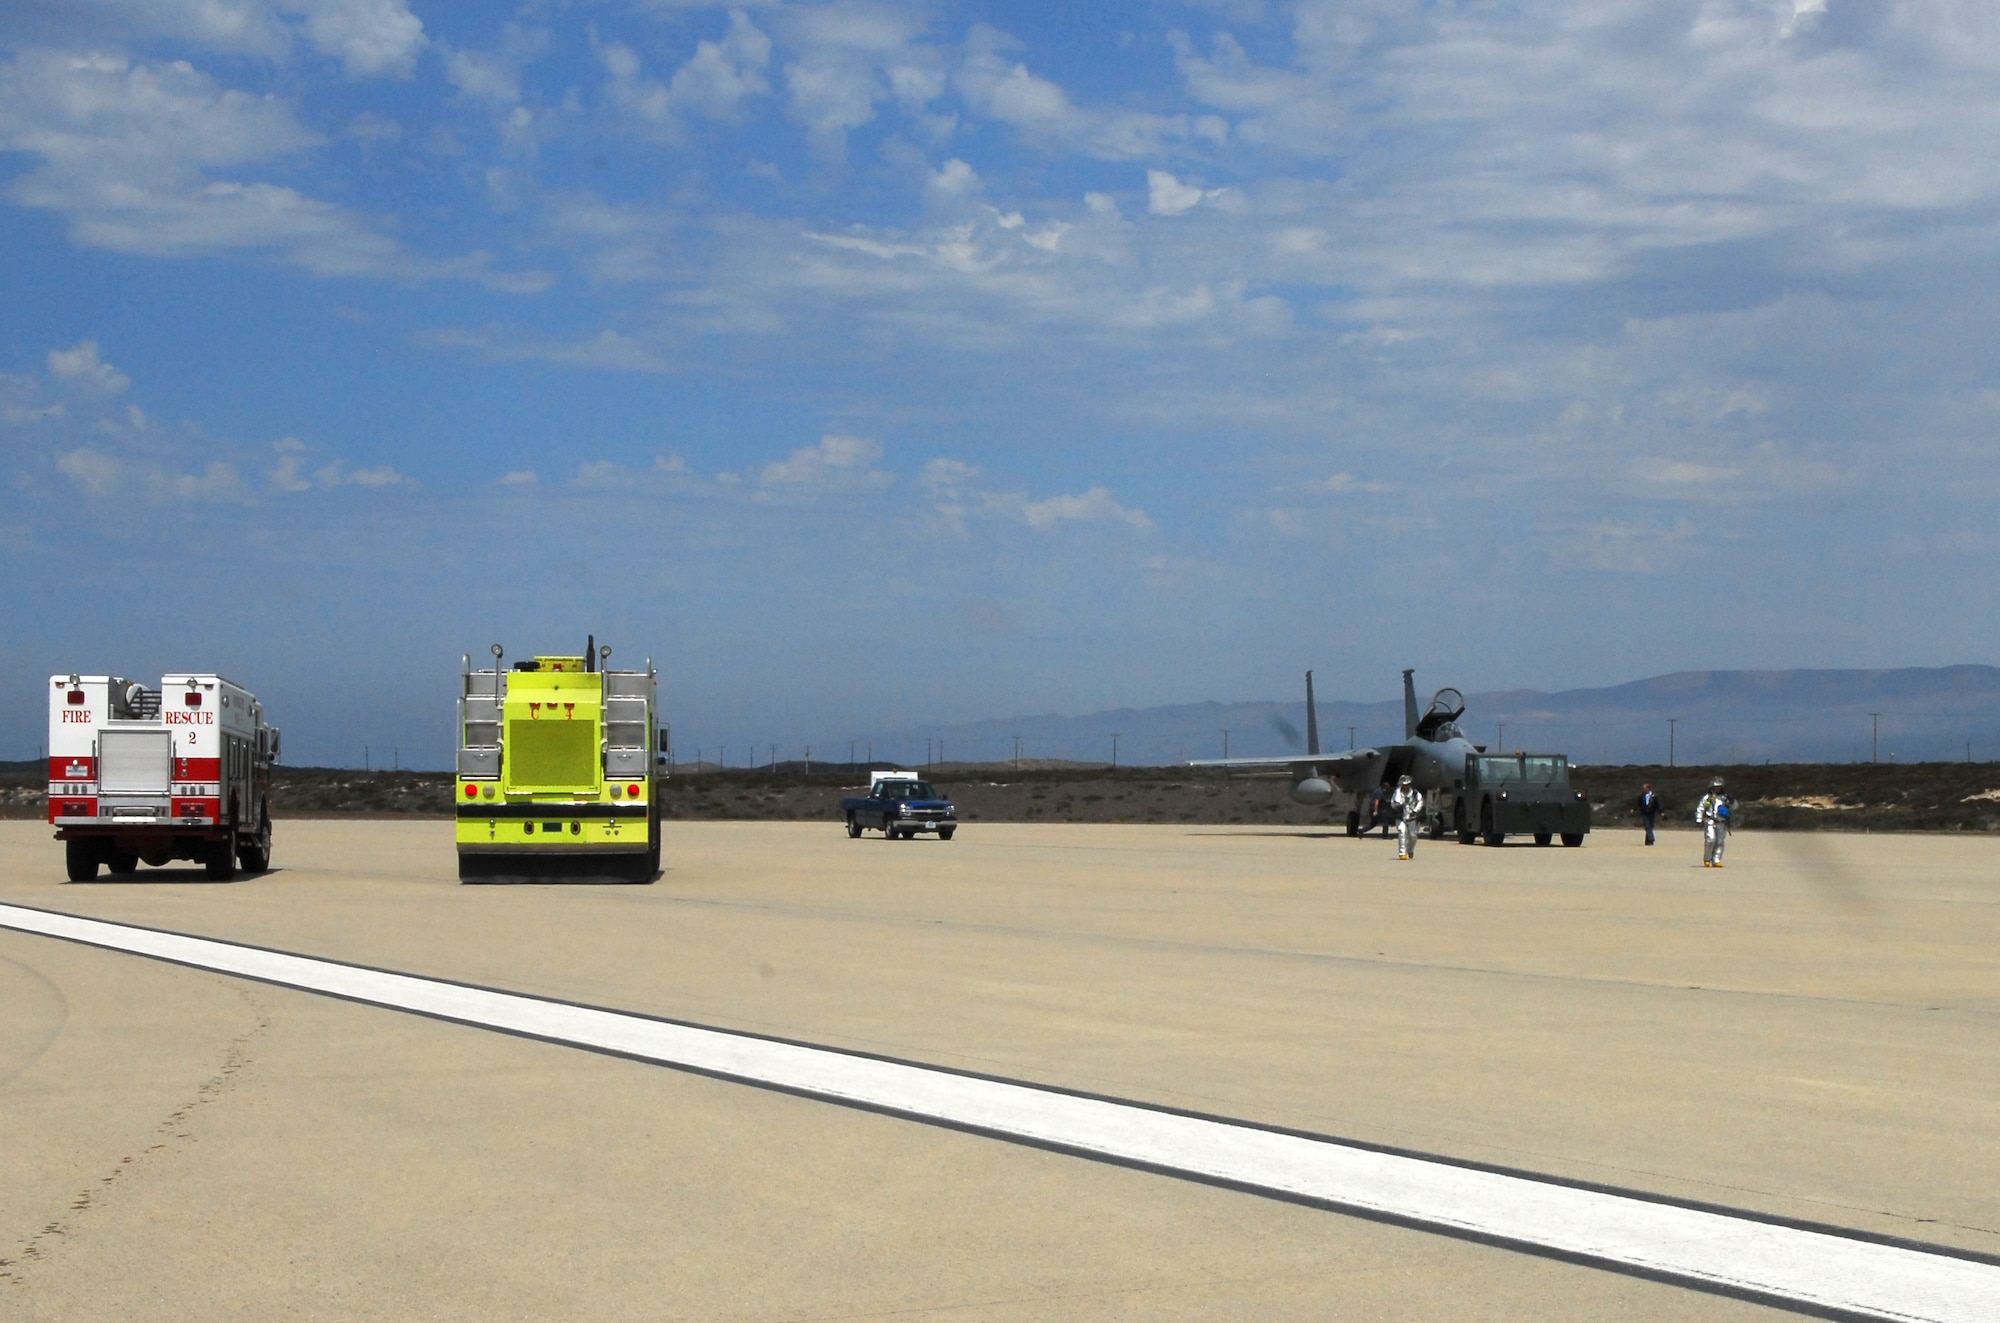 VANDENBERG AIR FORCE BASE, Calif. -- Airfield operators and Firefighters in flightline fire suits respond to an F-15A Eagle that landed on Vandenberg's flight line Aug. 30 due to operational difficulties. (U.S. Air Force photo/Airman 1st Class Robert Lewis)